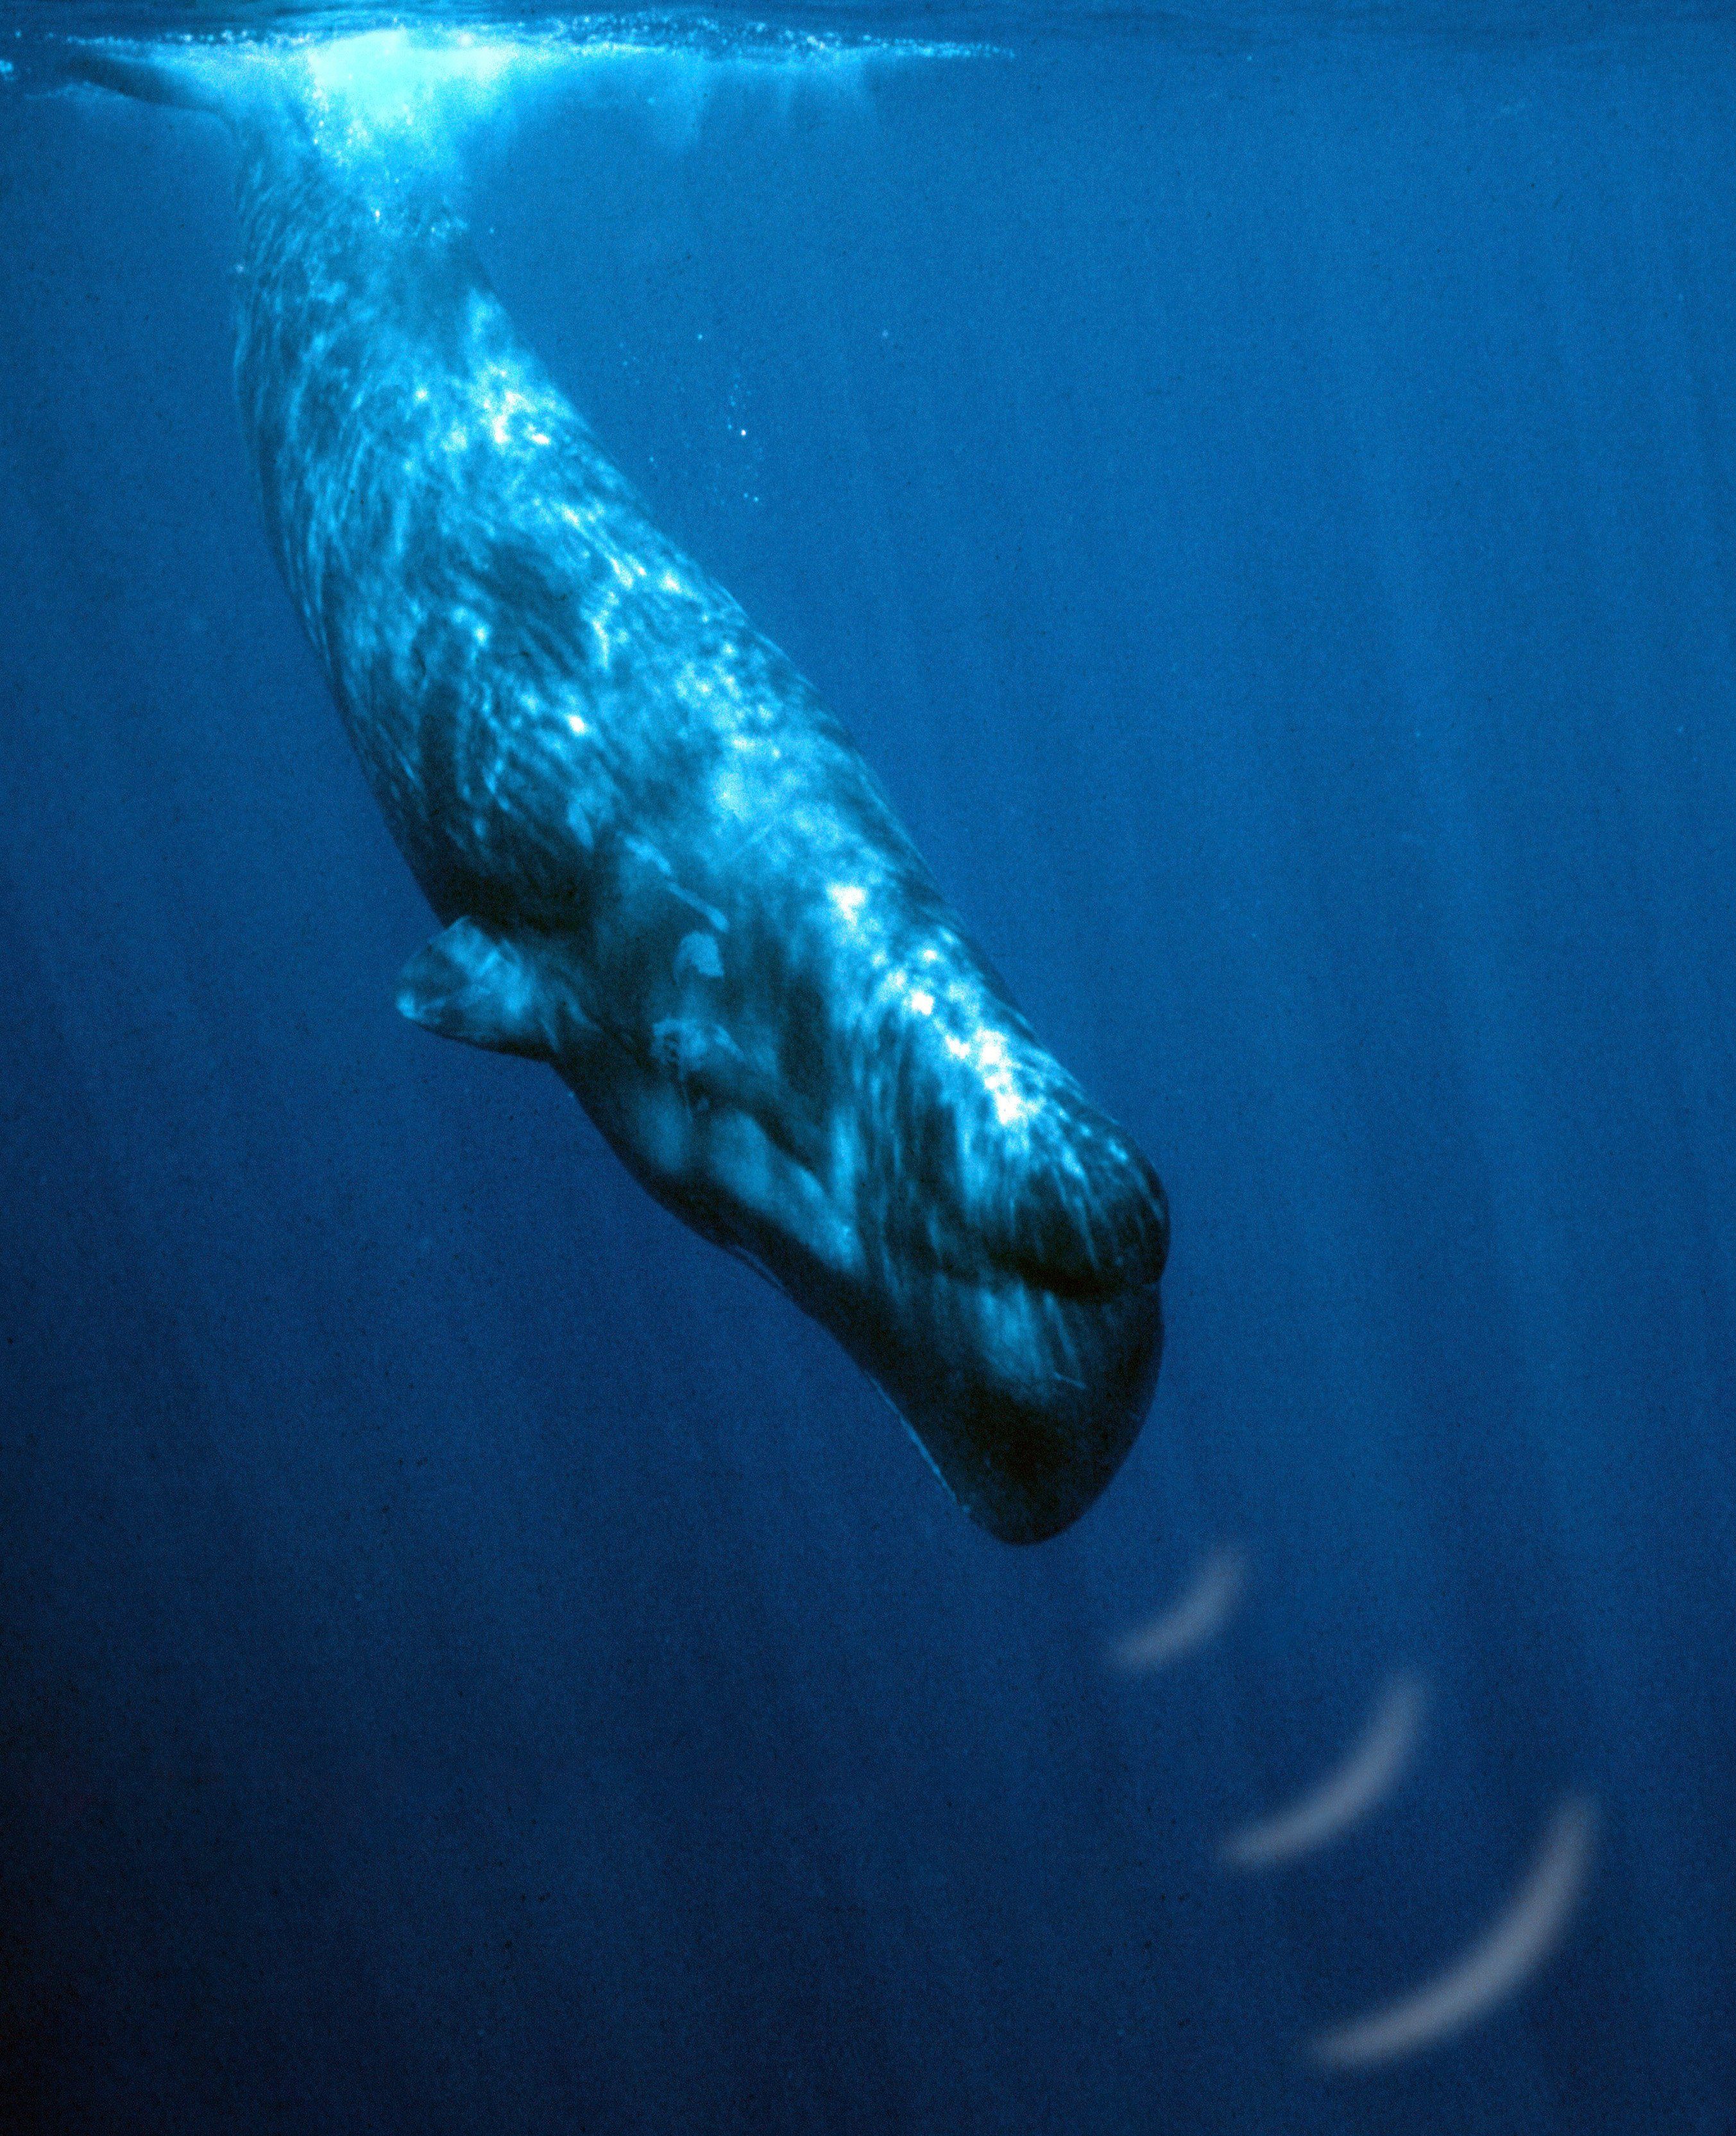 Listen to the sperm whale